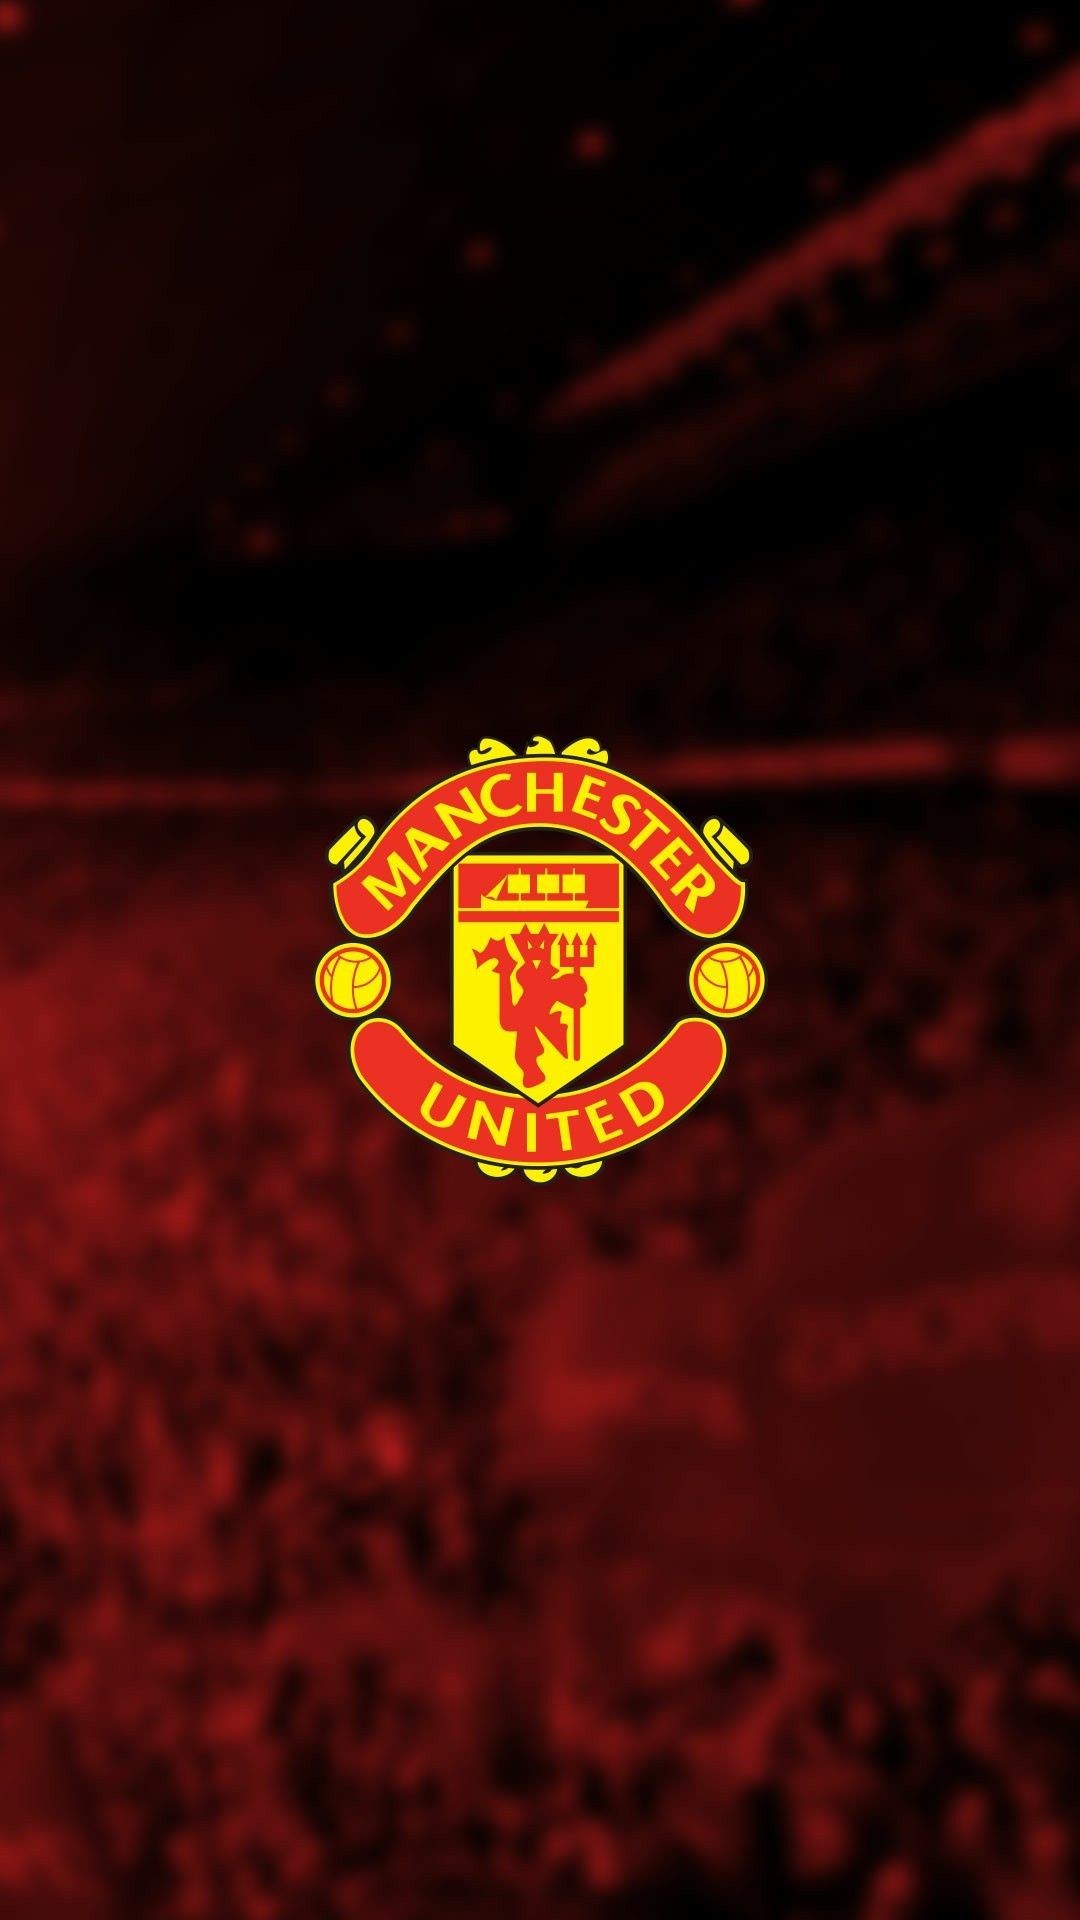 Manchester United iPhone 8 Wallpaper With high-resolution 1080X1920 pixel. You can use this wallpaper for your Desktop Computers, Mac Screensavers, Windows Backgrounds, iPhone Wallpapers, Tablet or Android Lock screen and another Mobile device